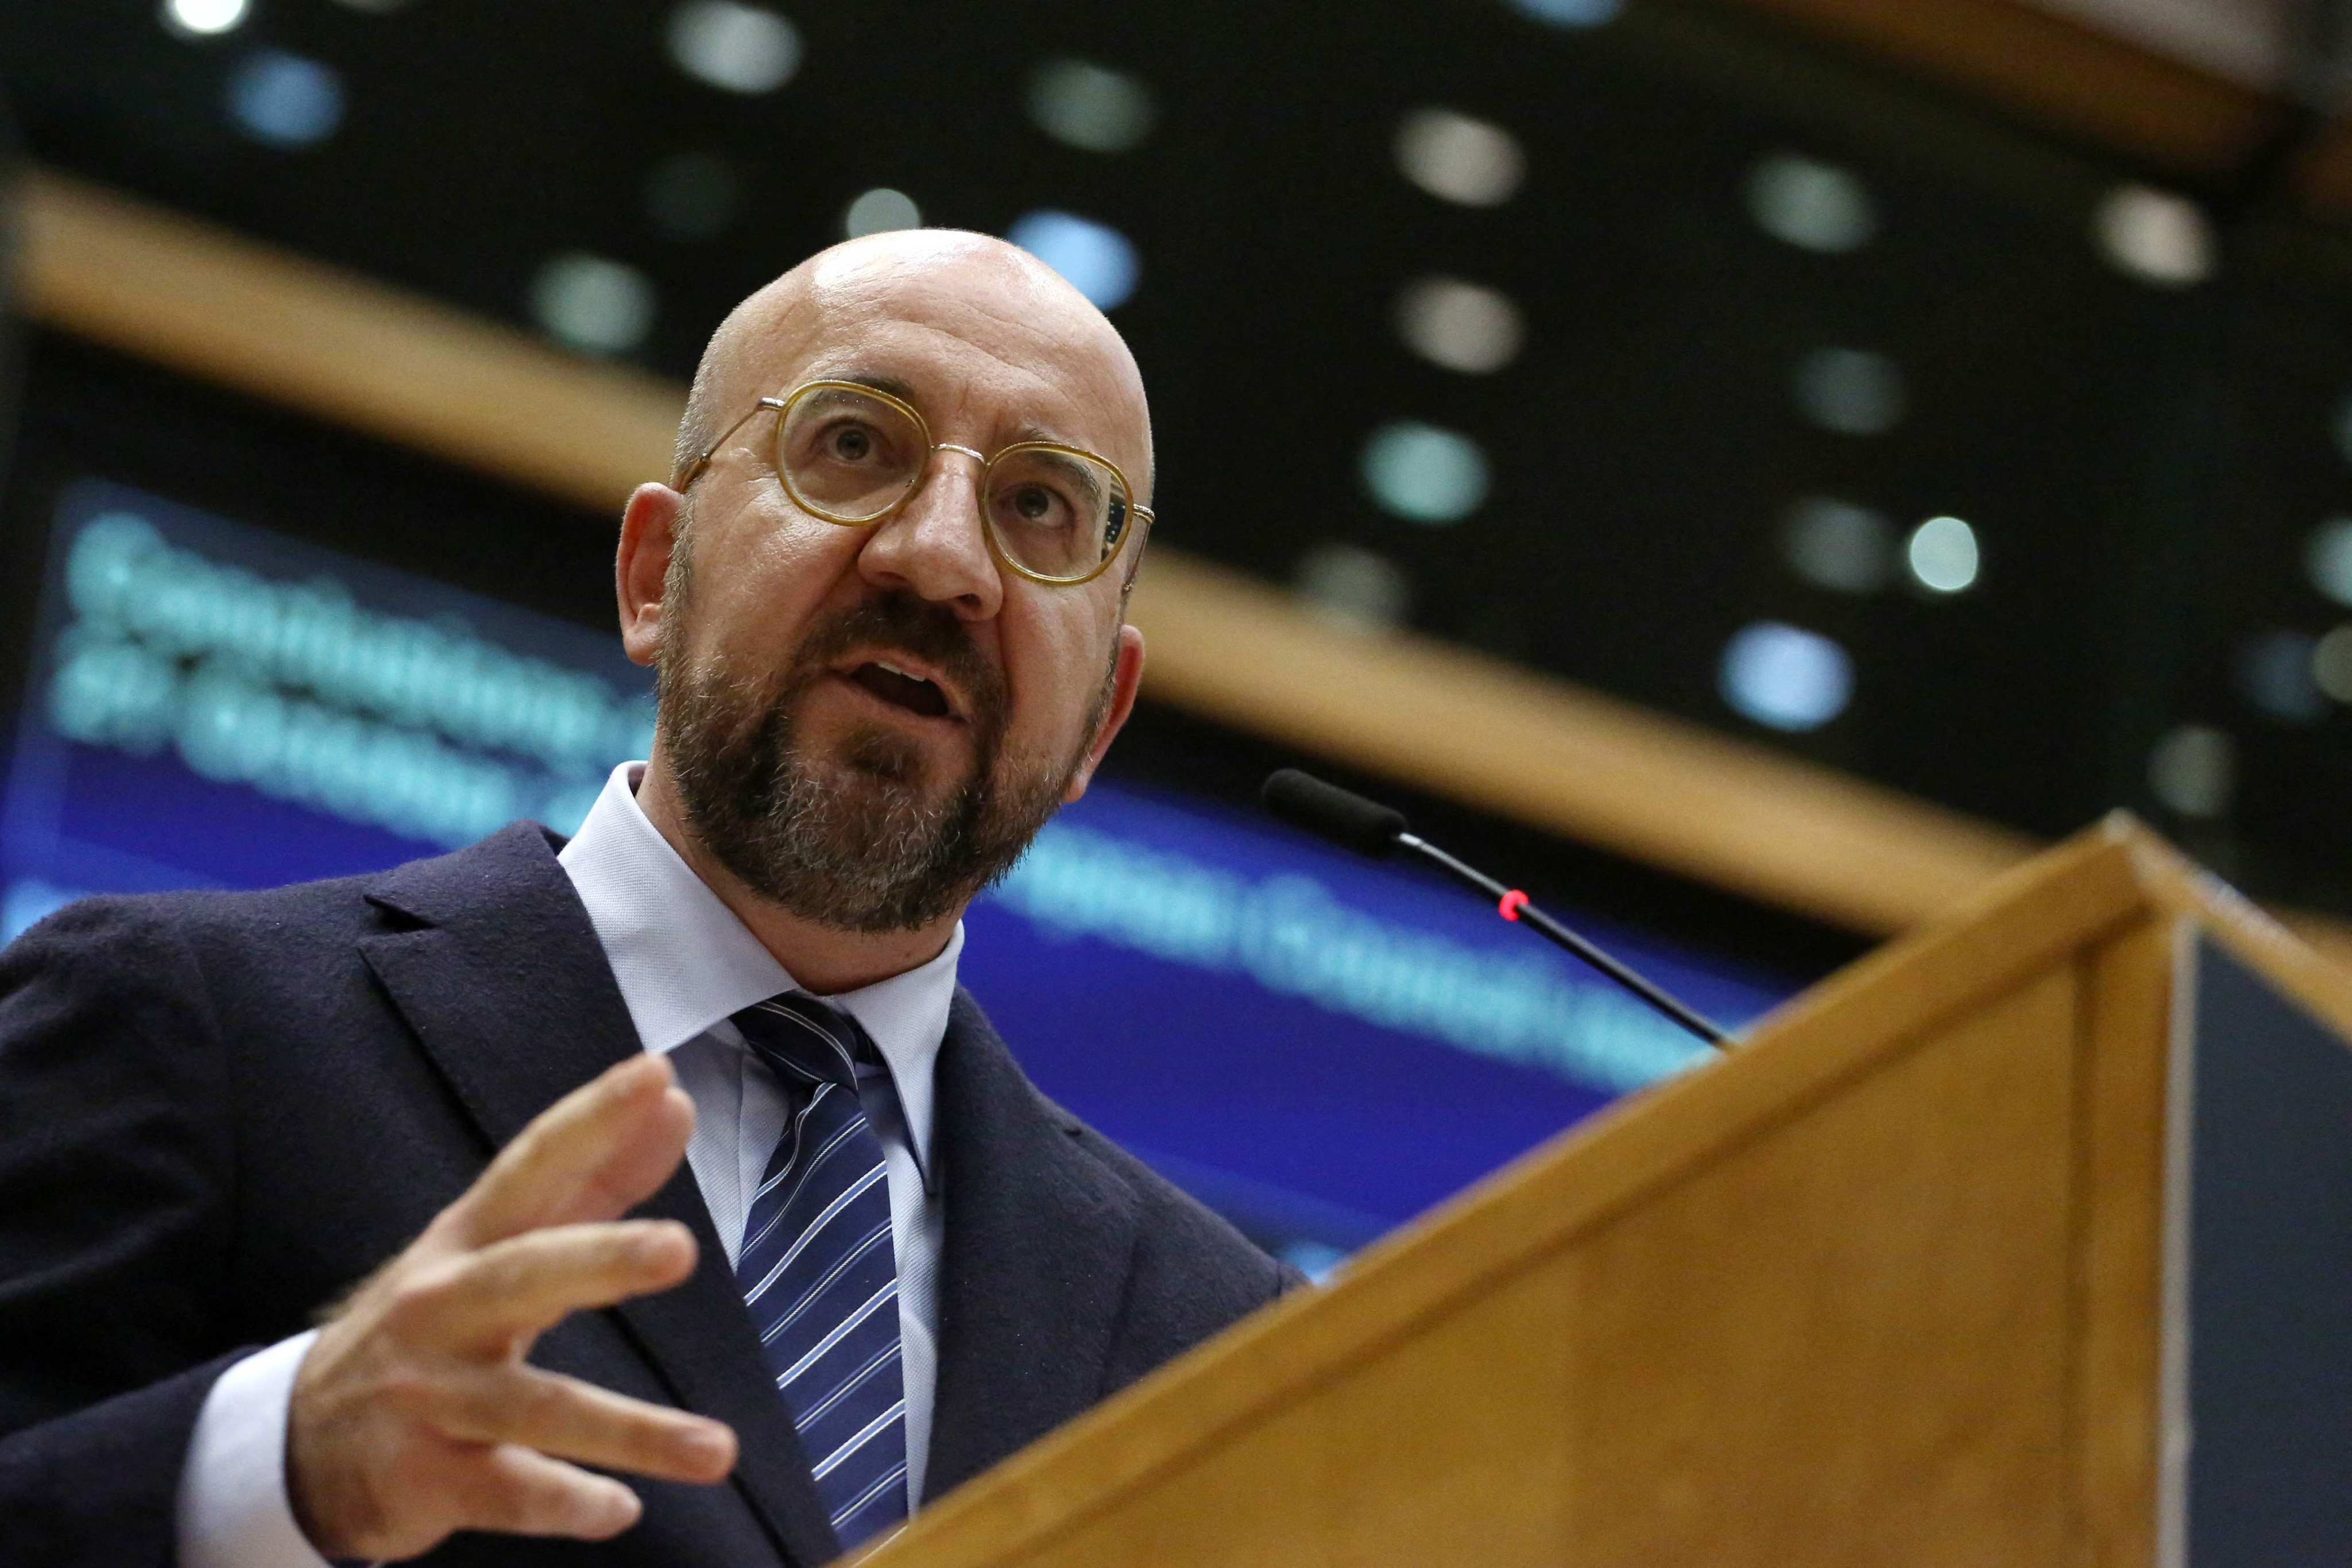 European Council President Charles Michel believes the meetings in Brussels will afford an opportunity to reconfirm the bloc’s broad and united stance towards China, according to a leaked EU statement. Photo: AFP